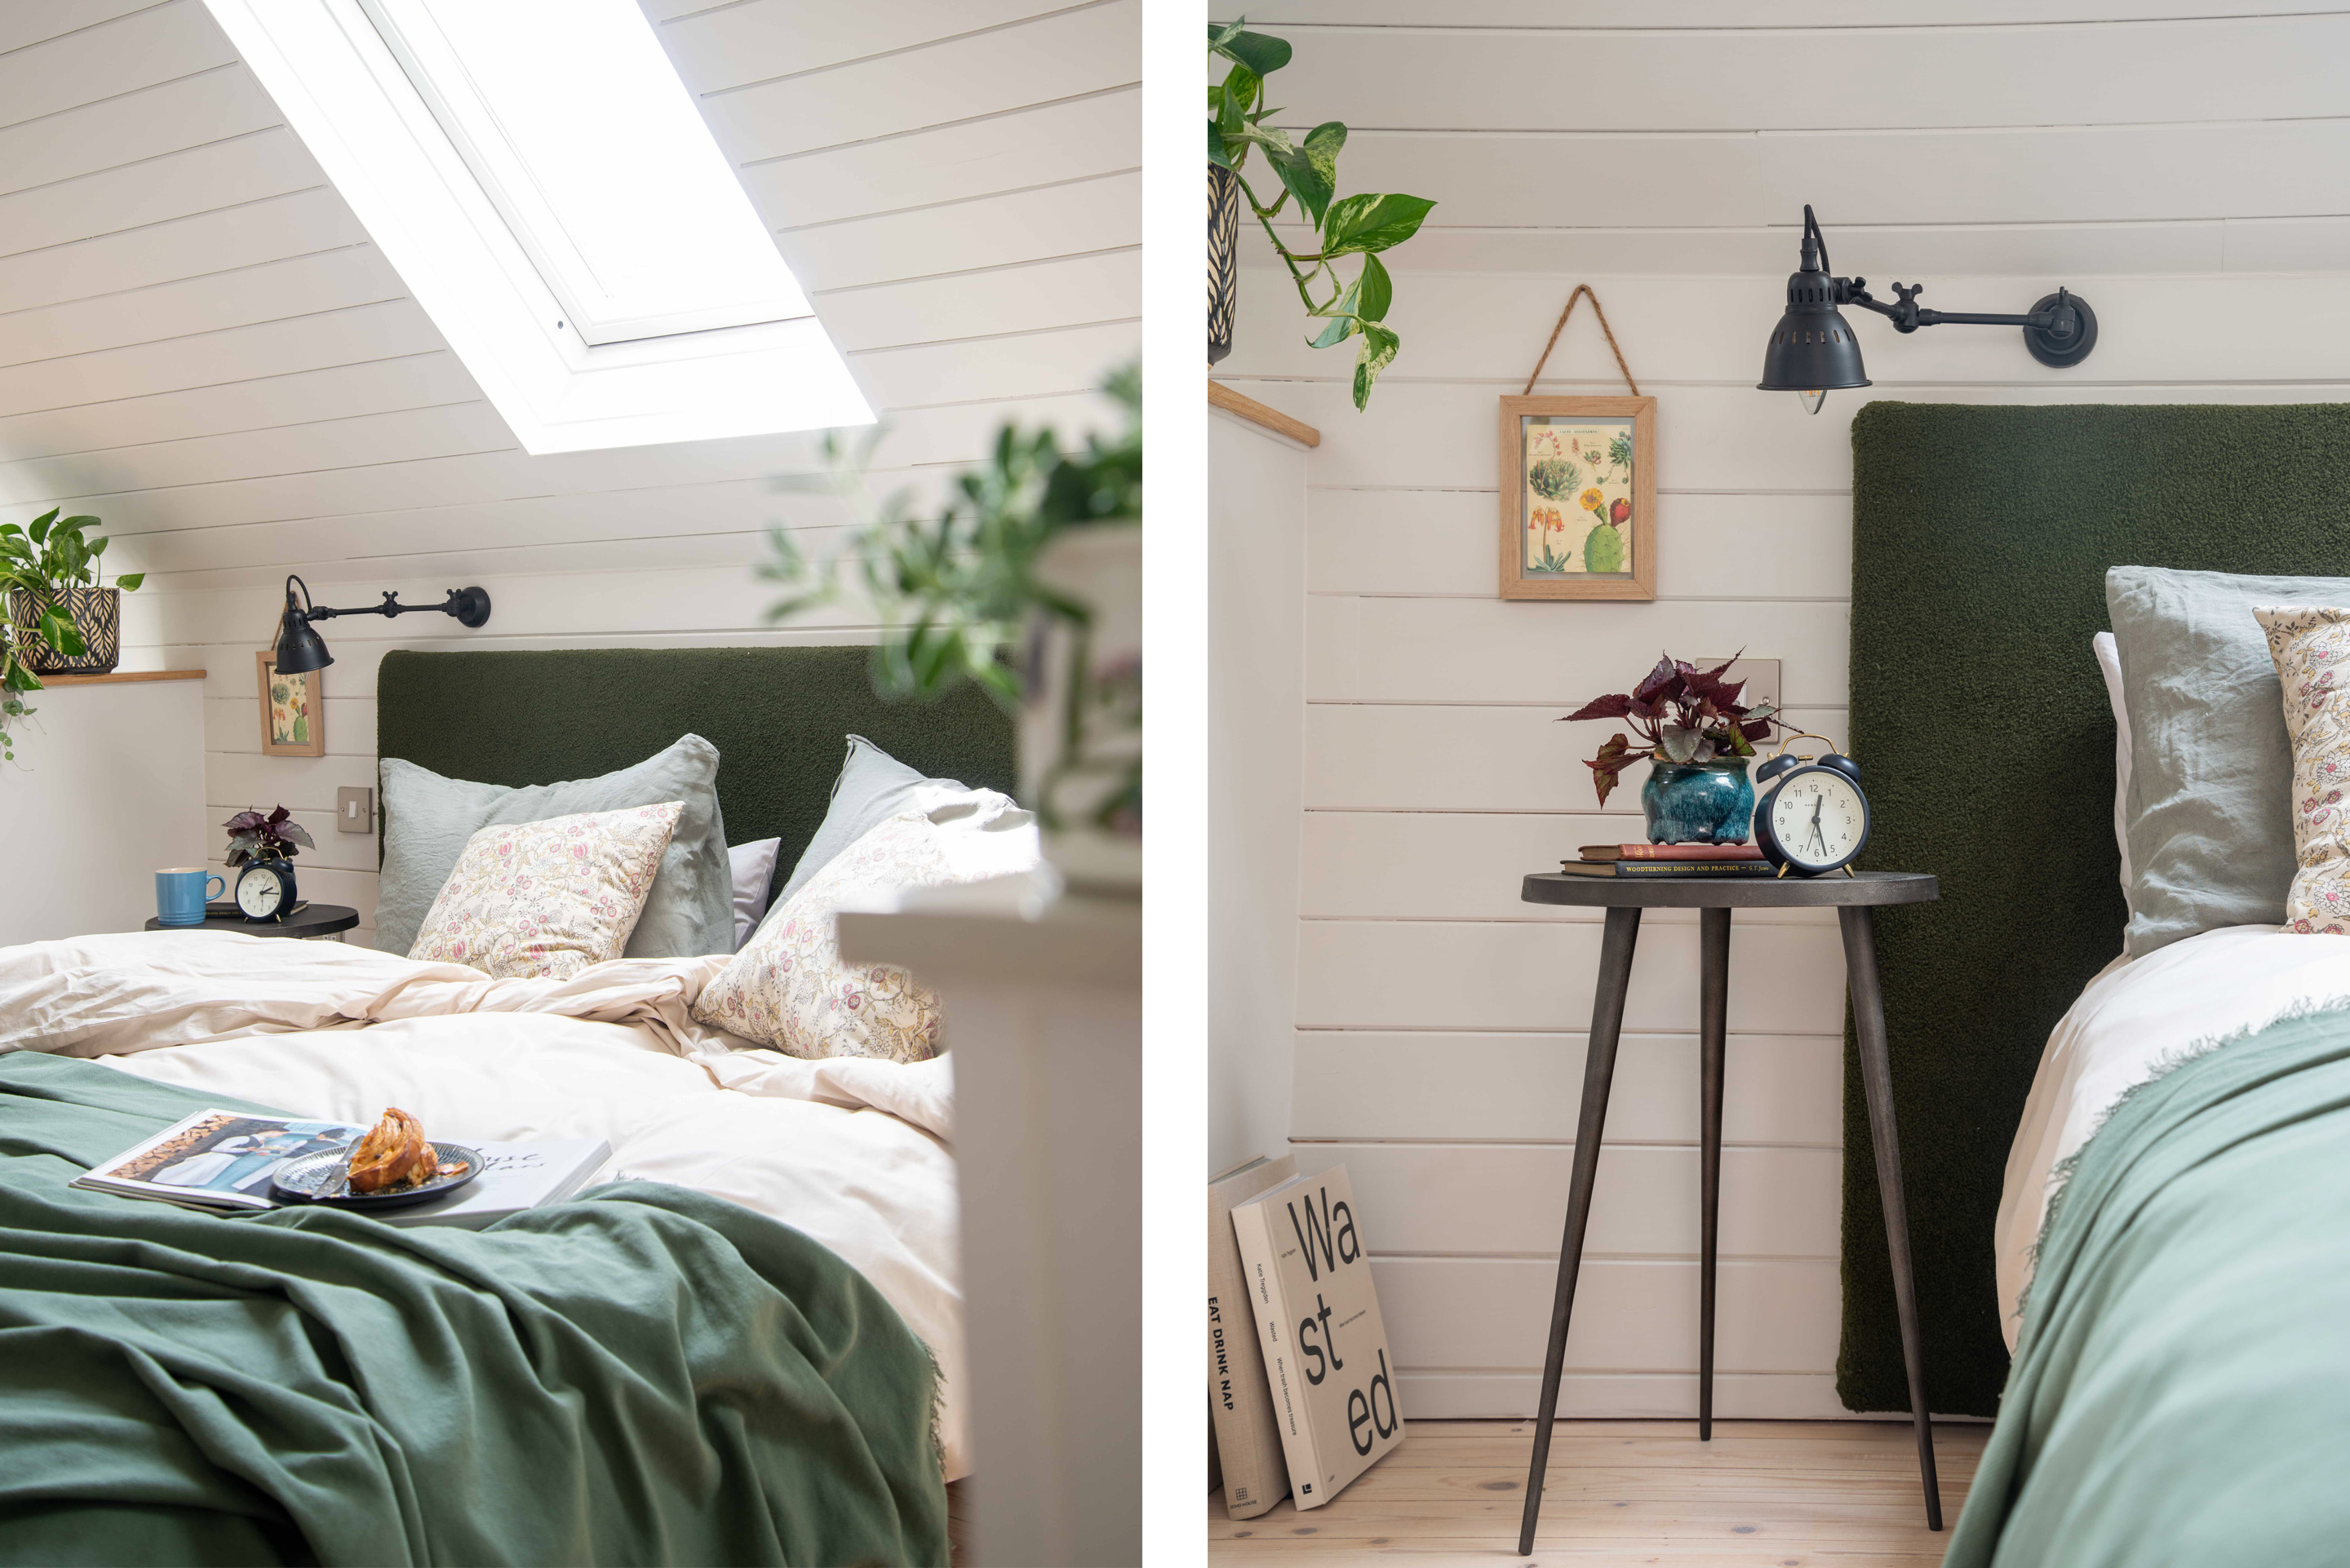 a bedroom in a loft conversion. A custom made headboard in a forest green boucle against white tongue and groove walls for a cosy, contemporary feel. Natural linen bedding and a metal tripod bedside table.  